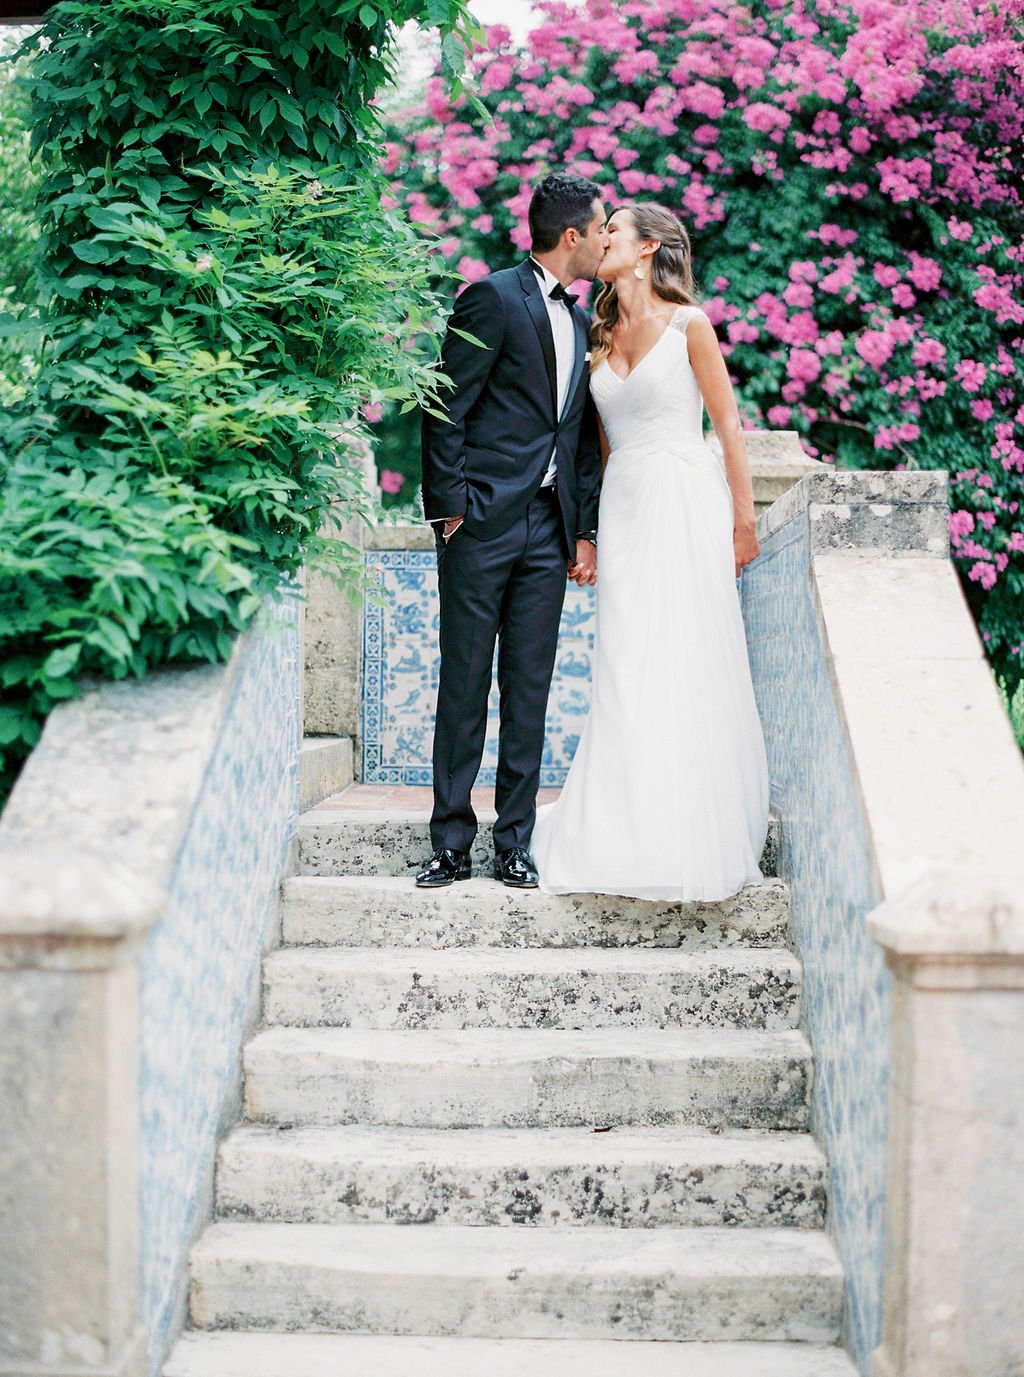 Bride and groom standing on top of the stairs outside a Portuguese building decorated with blue and white tiles and with pink flowers in the background